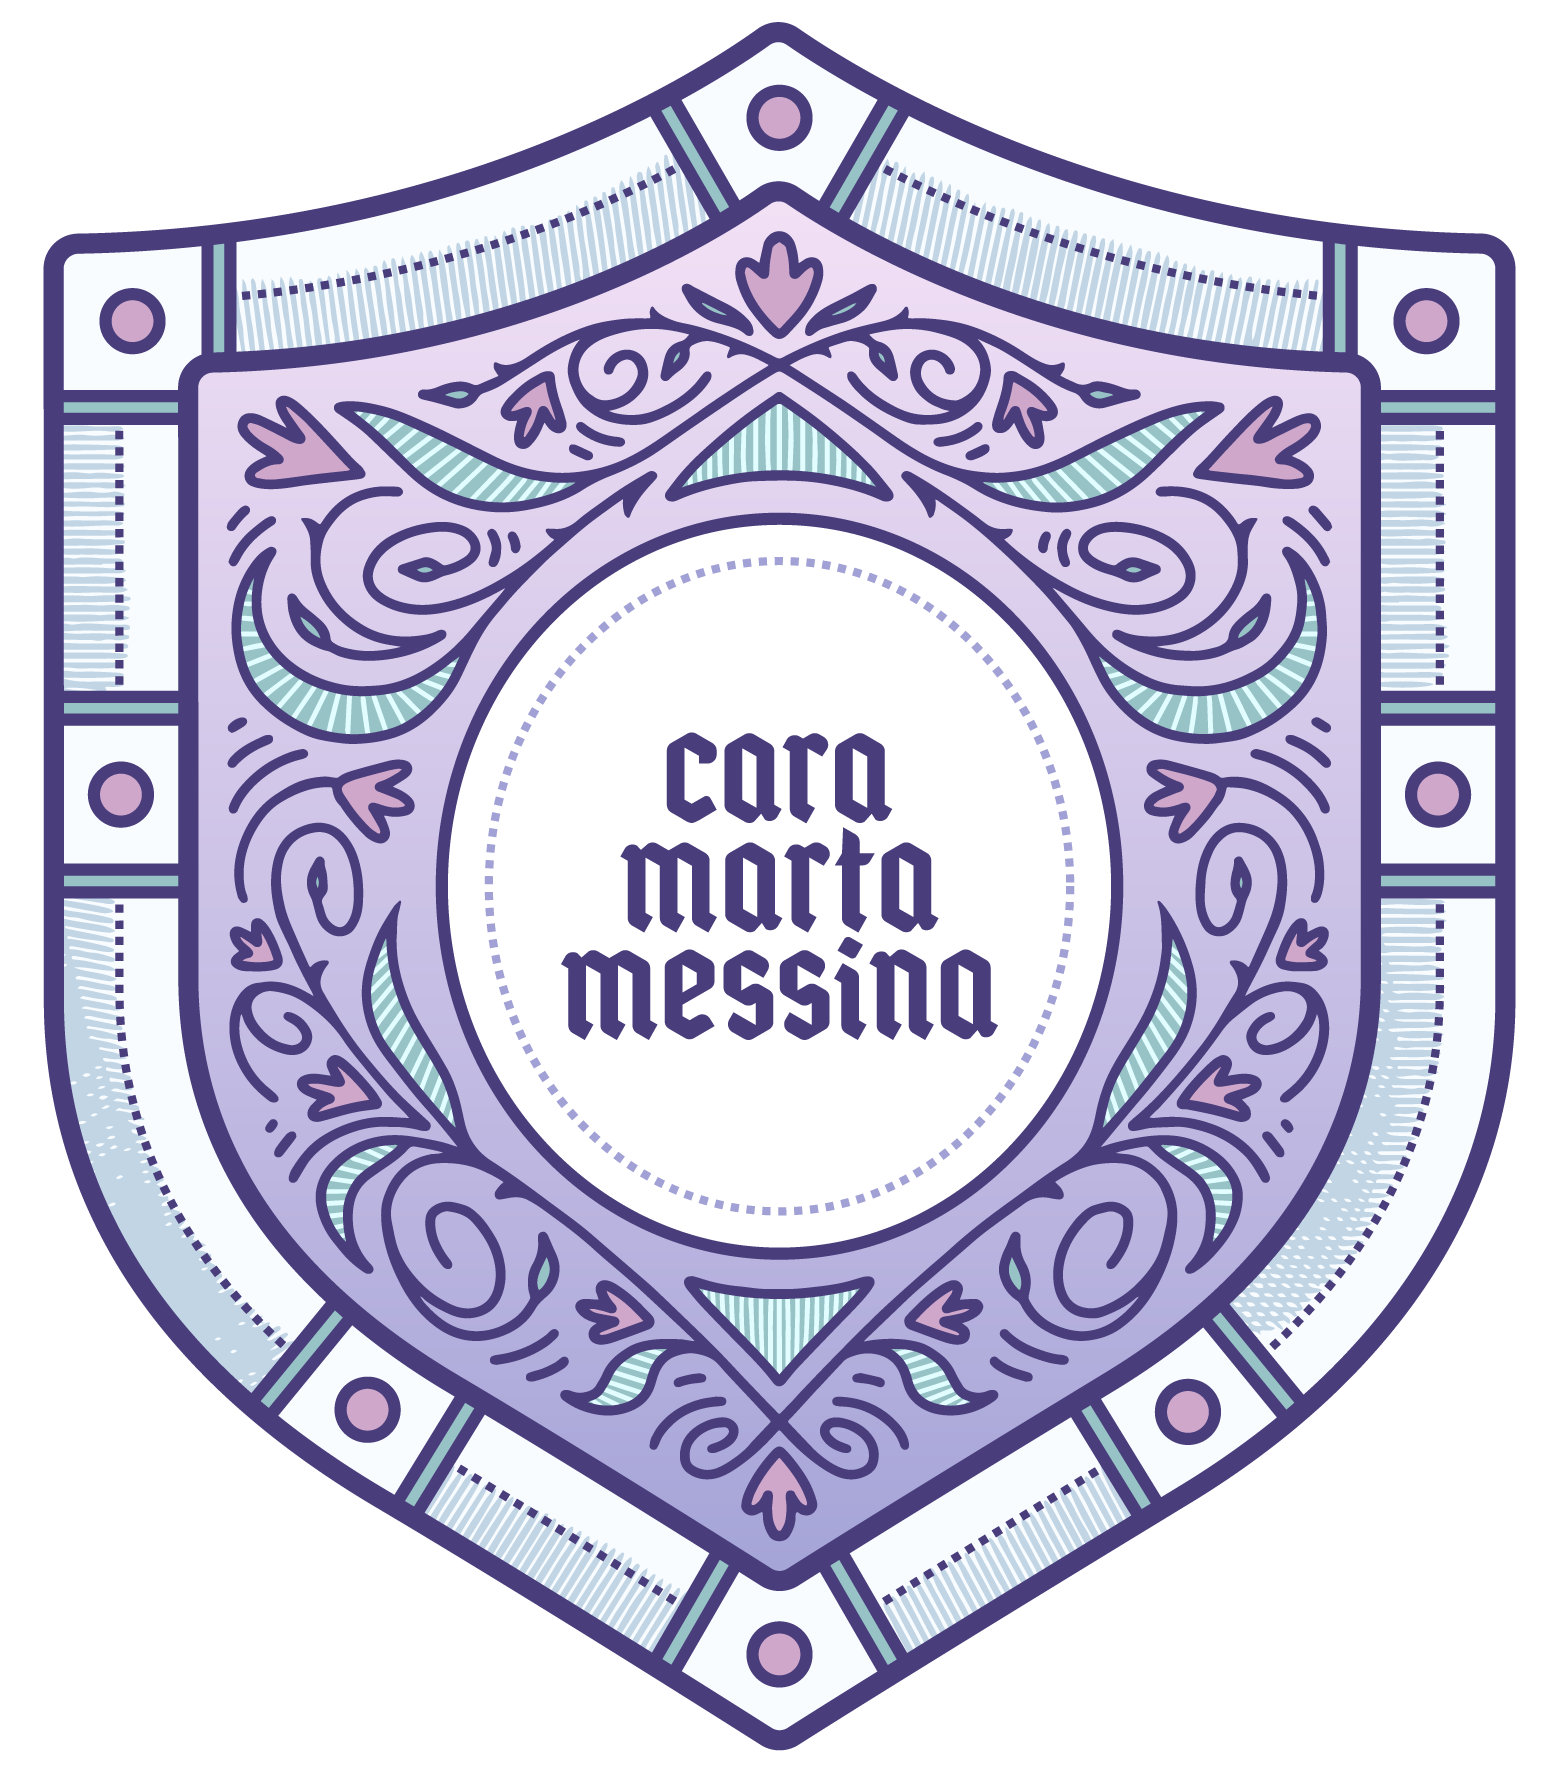 This image is the CFT ornate shield logo, except the words 'Cara Marta Messina' are in the middle.